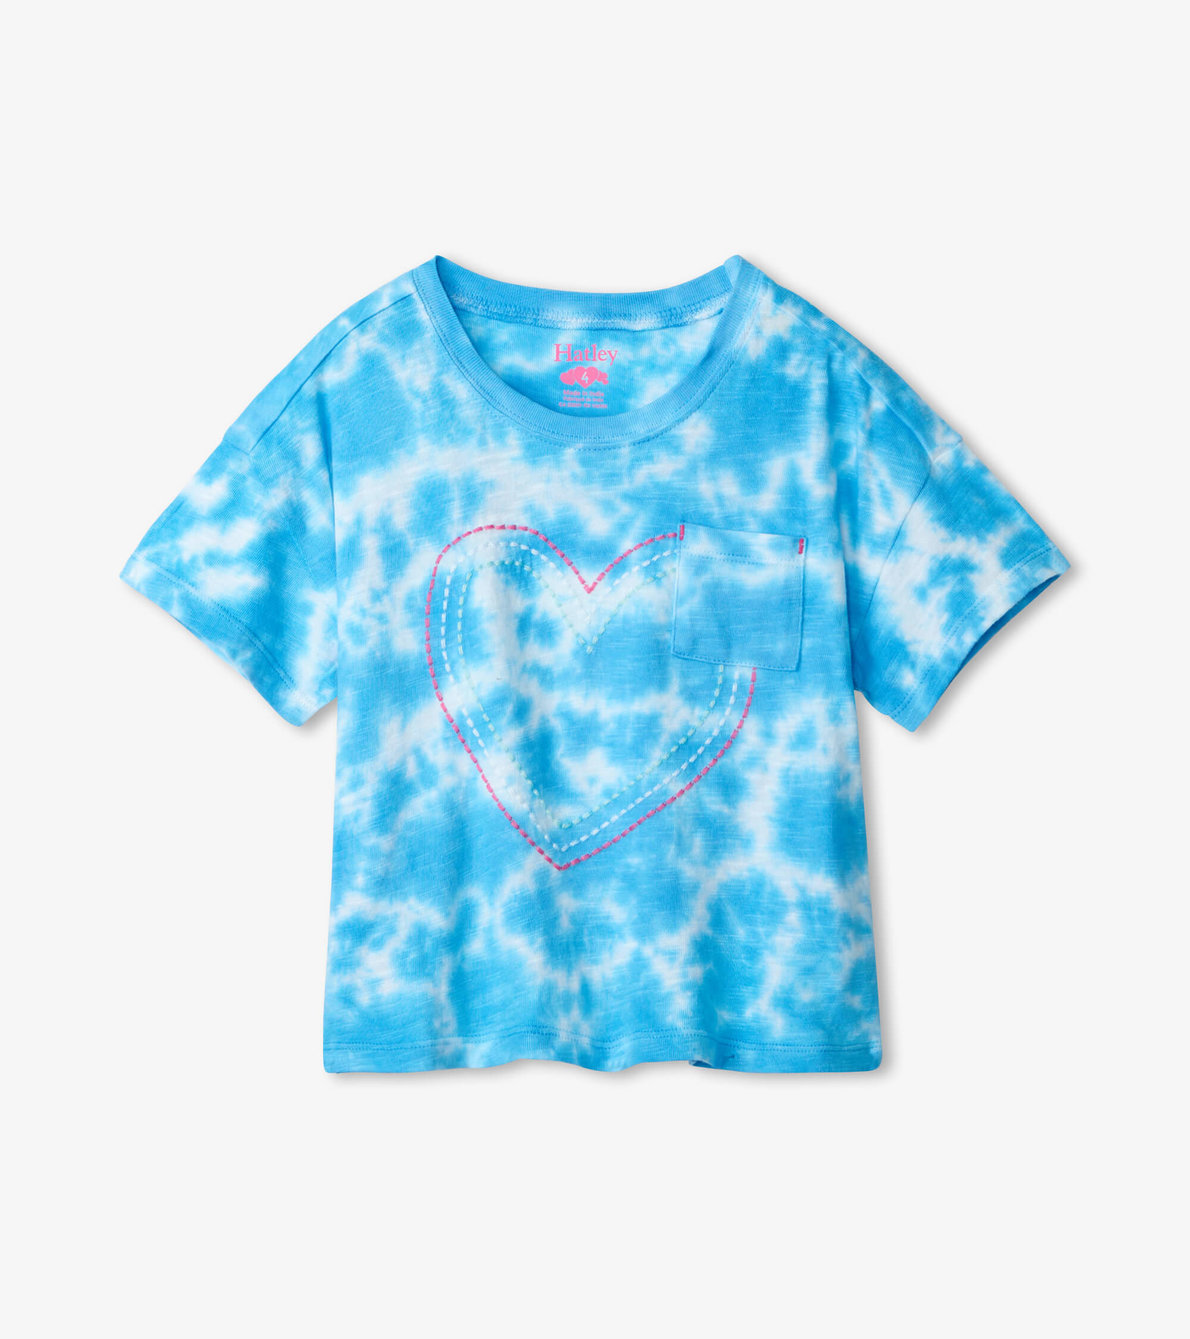 View larger image of Blue Sky Tie Dye Front Pocket Tee